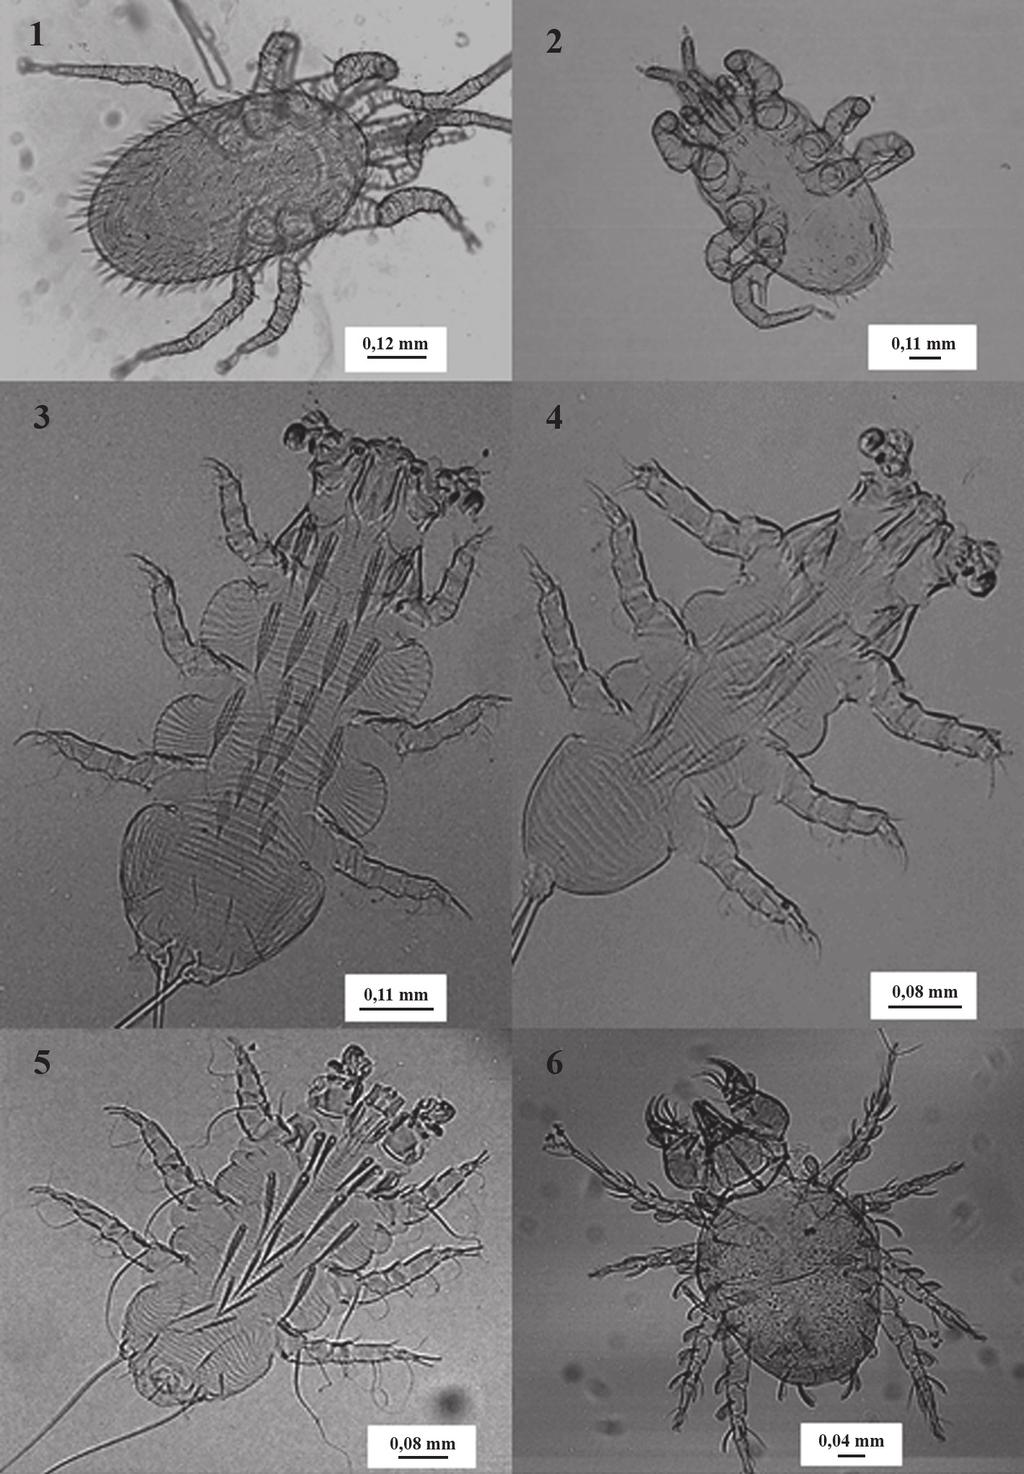 Geographic variation in ectoparasitic mites diversity in Tadarida brasiliensis... 453 Figs 1-6, ectoparasitc mites of Tadarida brasiliensis (Geoffroy, 1824).